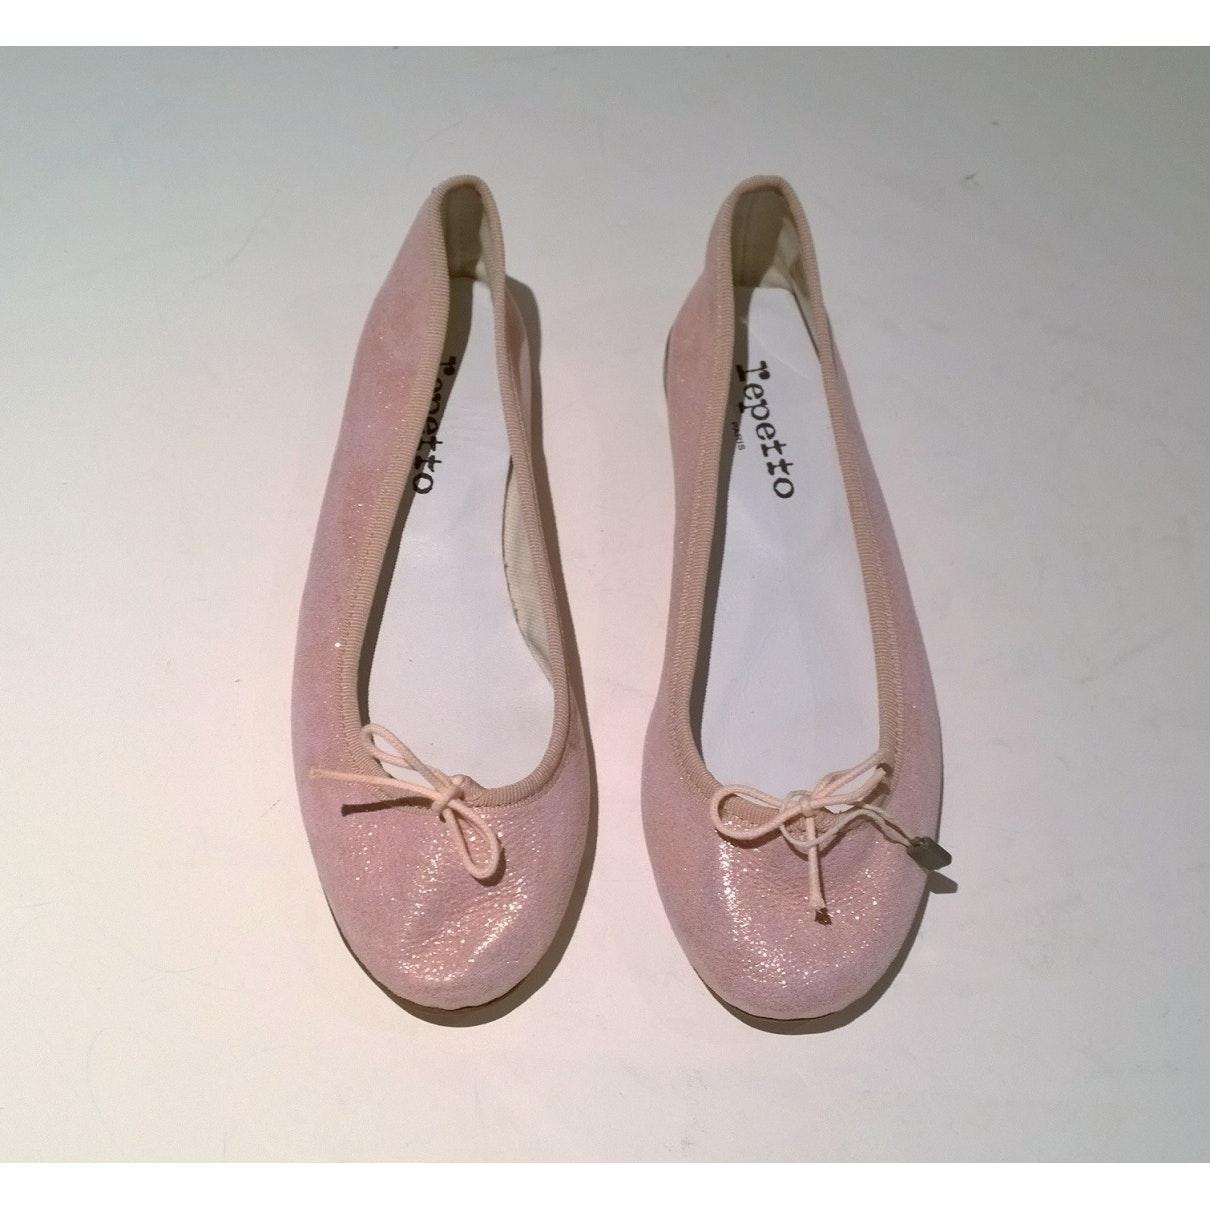 Repetto Suede Ballet Flats in Pink - Lyst